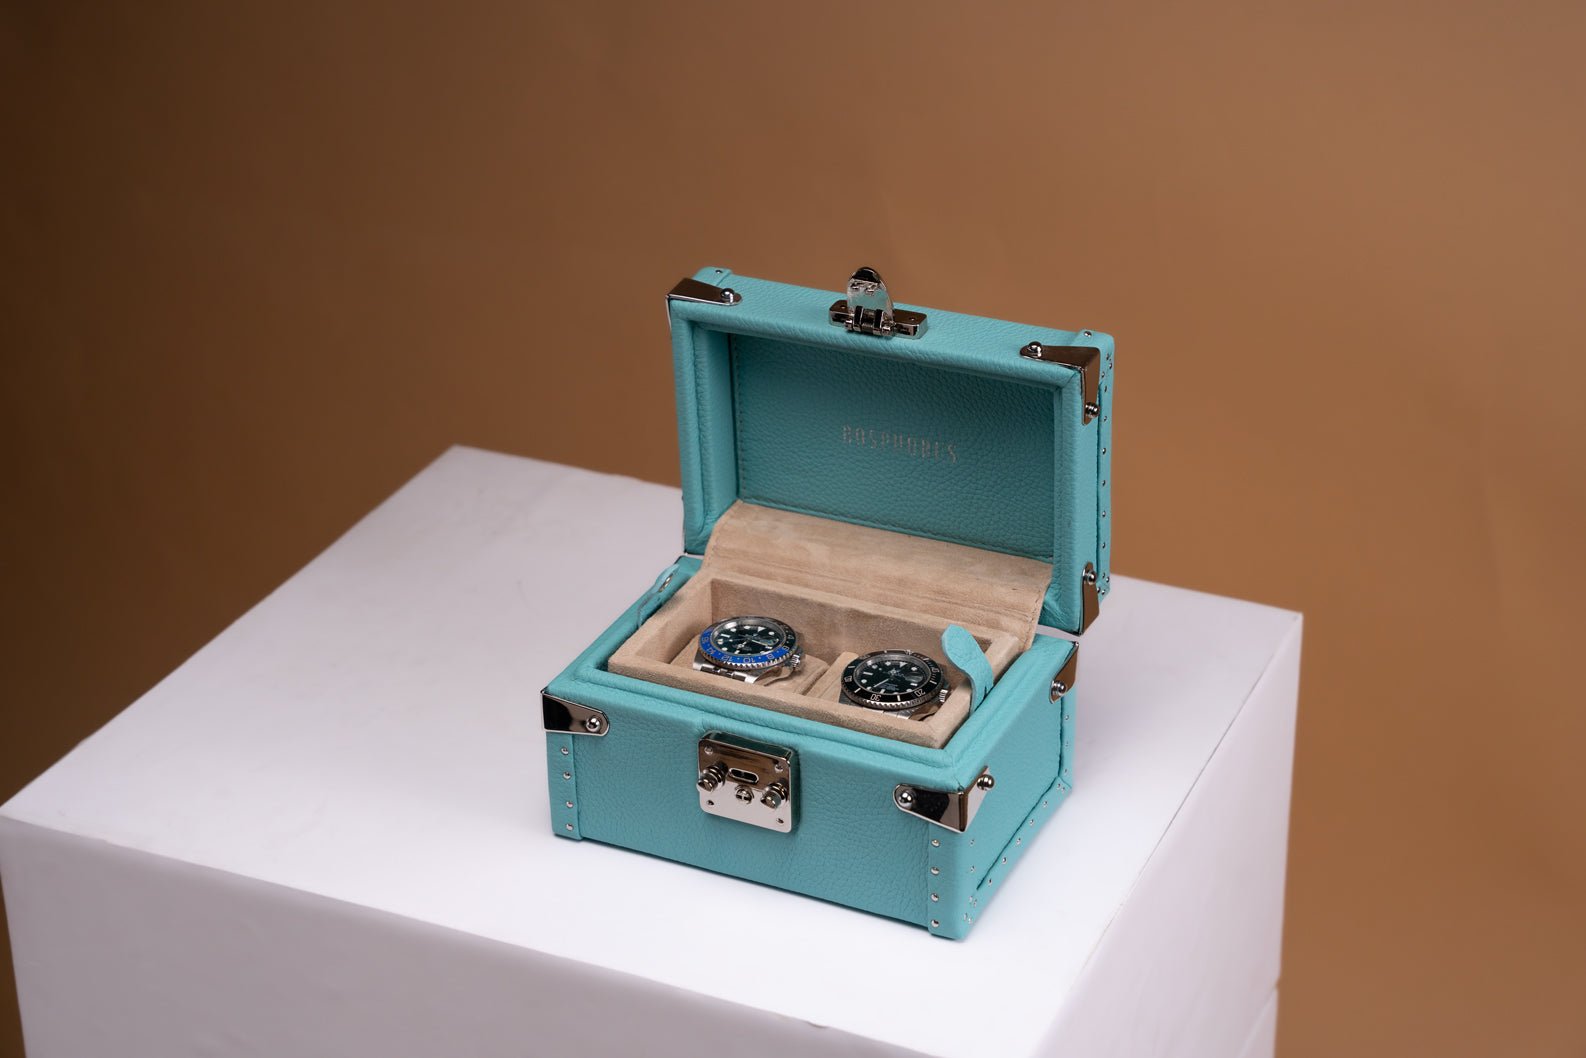 Bosphorus LeatherPetra Watch Case - Togo Tiffany Blue For 2 Watches